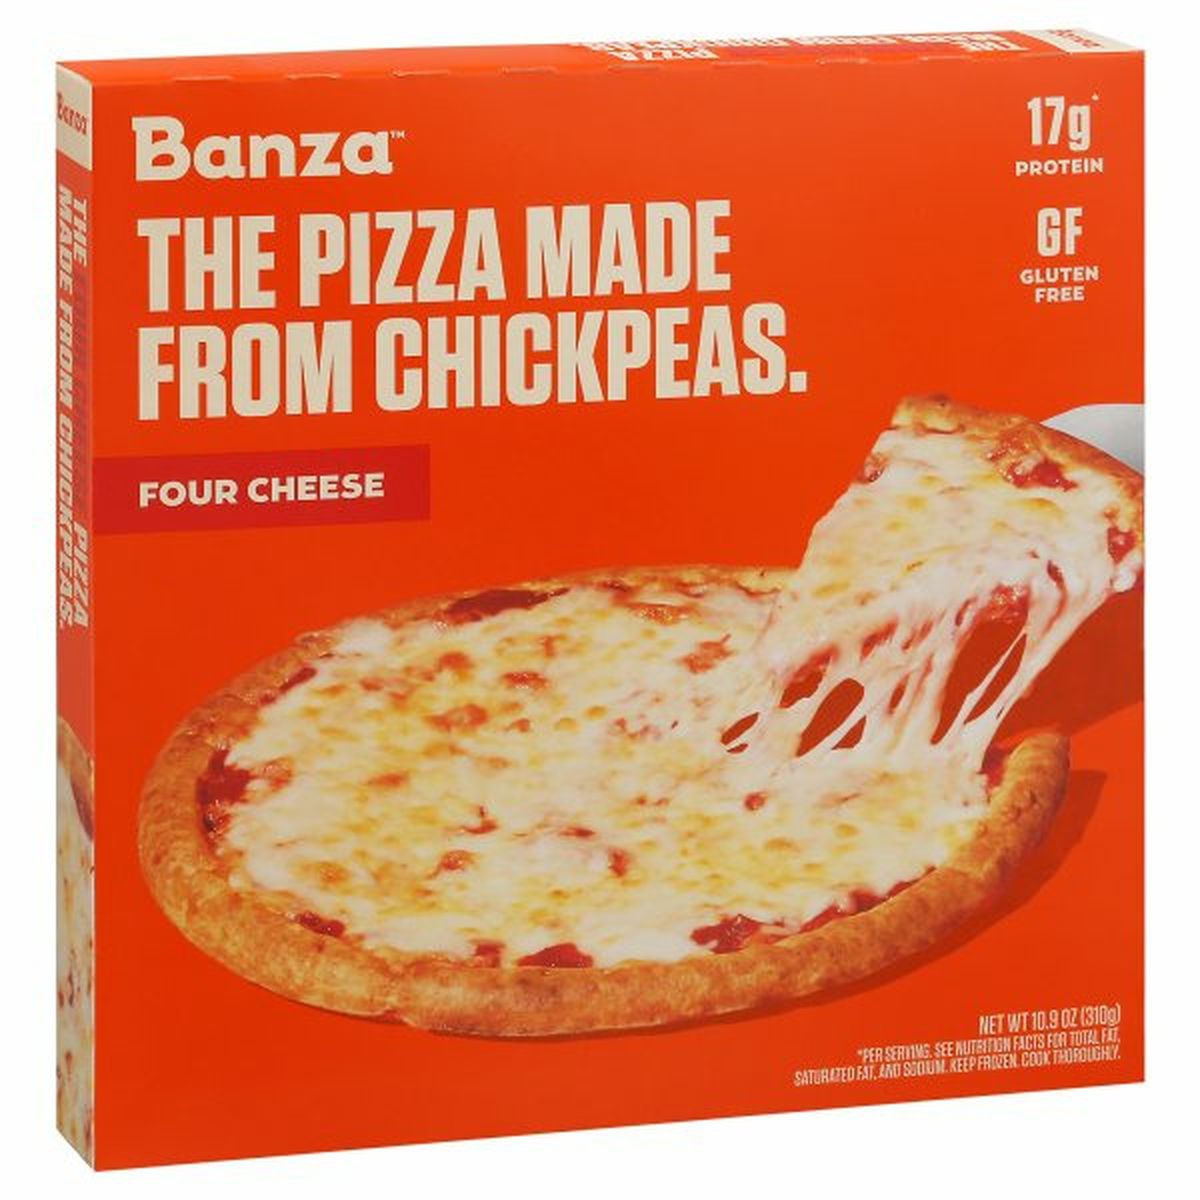 Calories in Banza Pizza, Four Cheese